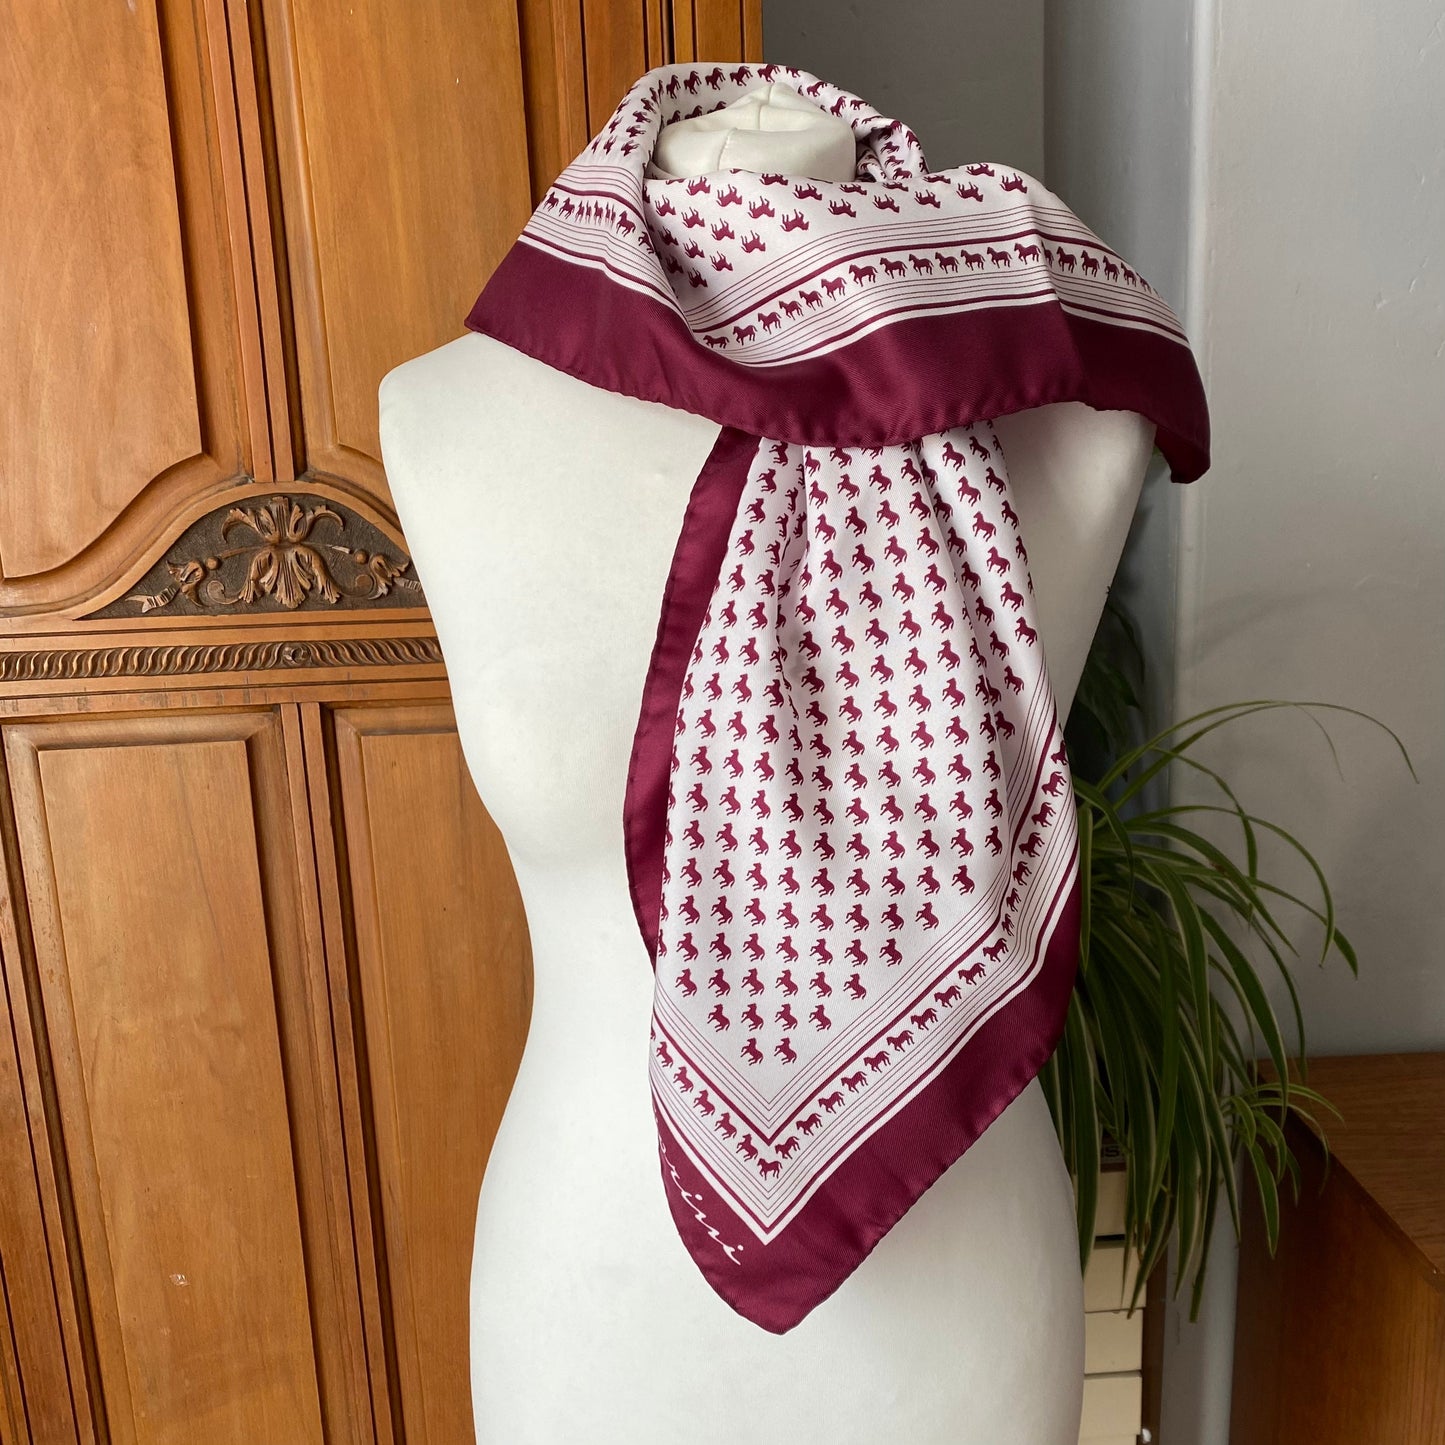 Large square vintage scarf. White and purple horse print ,  Fiorini scarf. Great gift idea